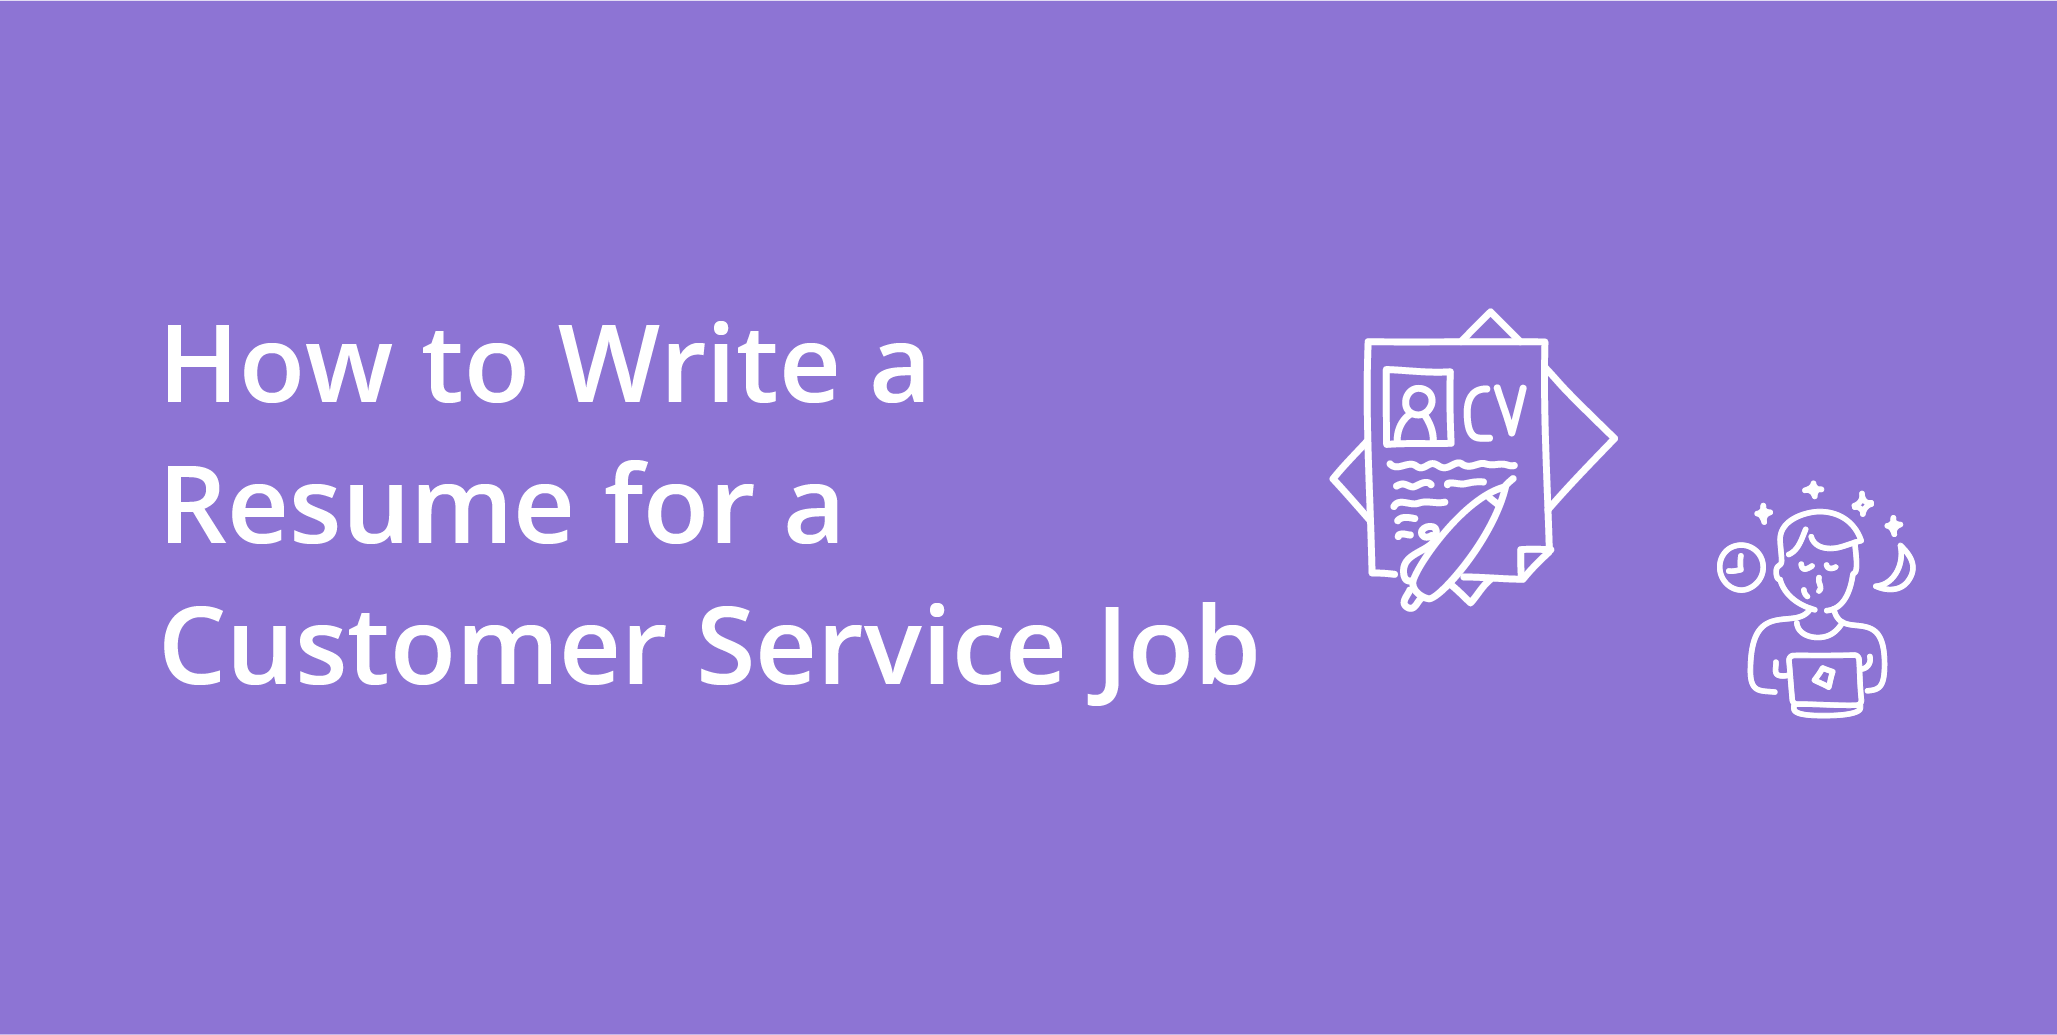 How to Write a Resume for a Customer Service Job | Telephones for business